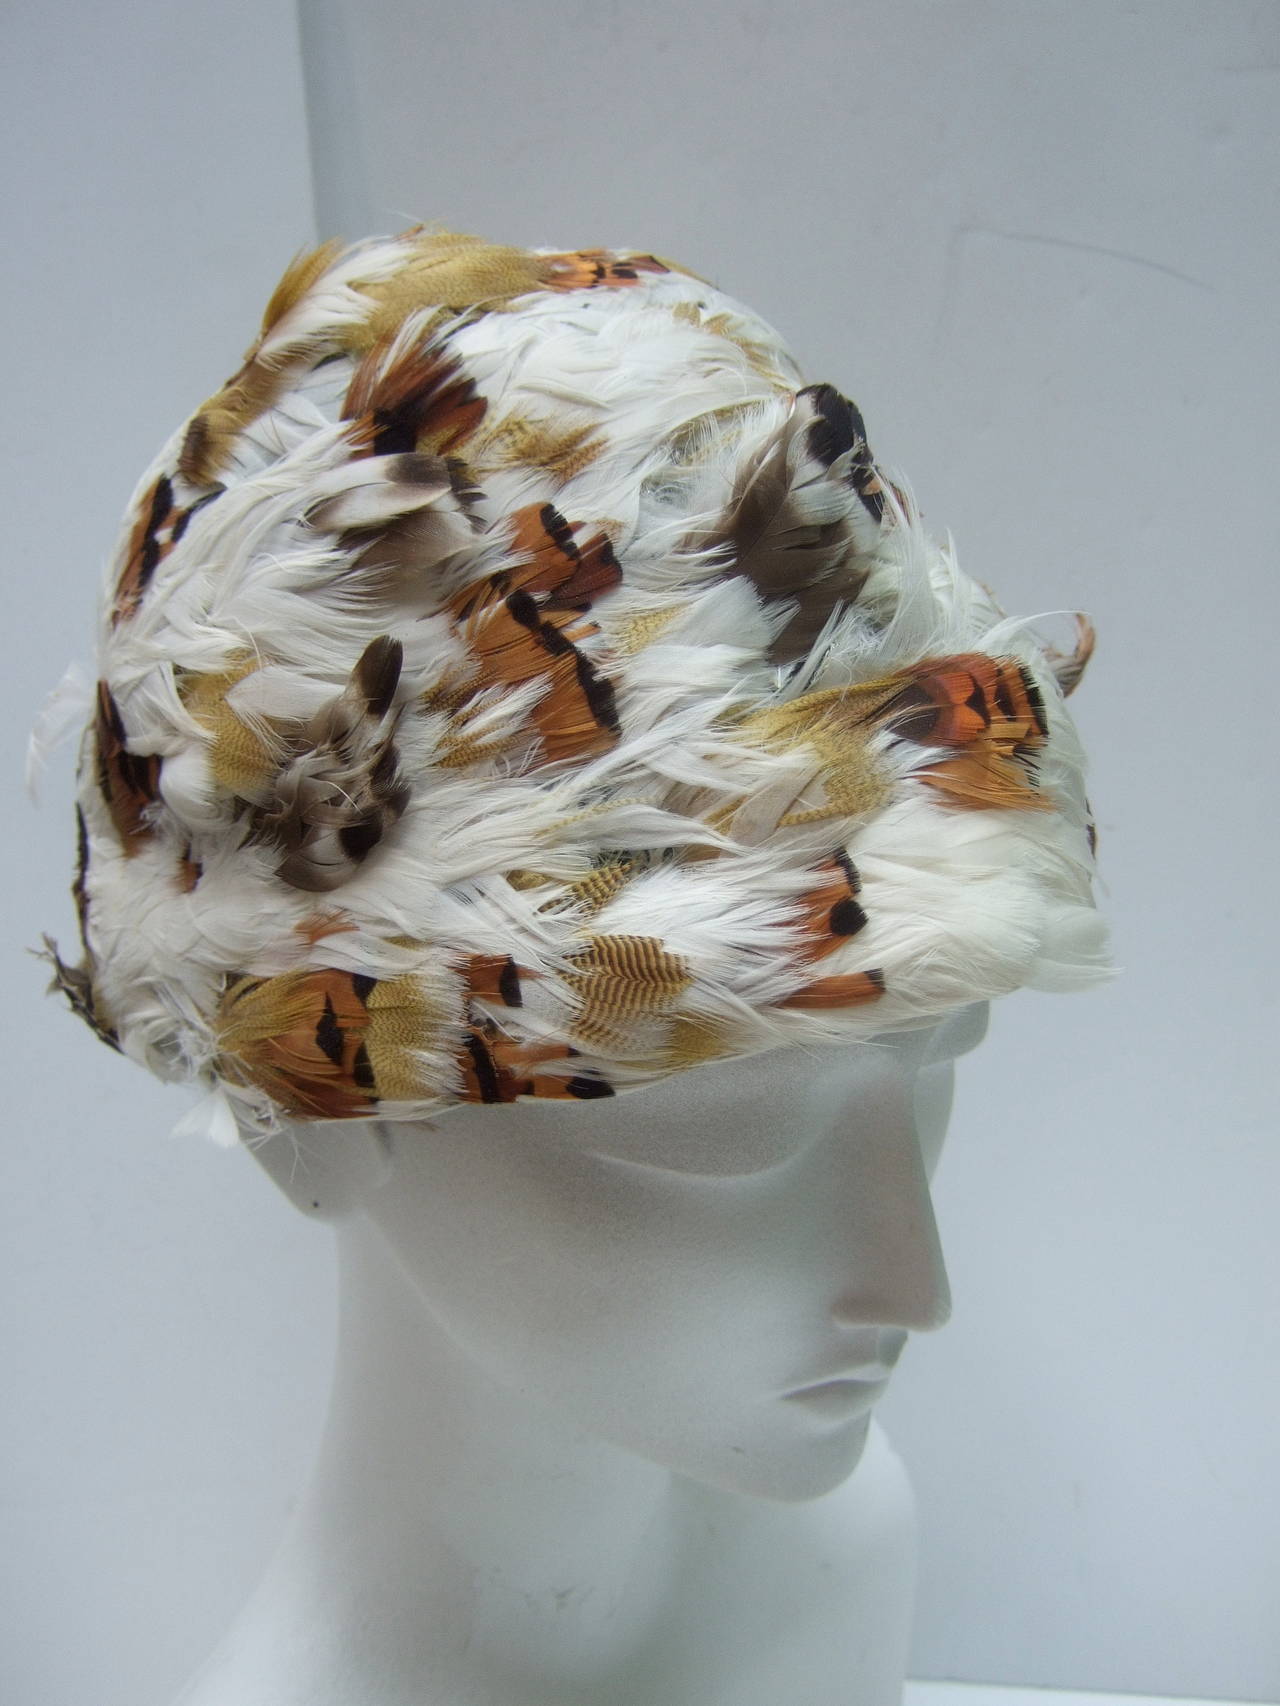 Women's Schiaparelli Exotic Feather Dome Hat Made in Italy c 1950